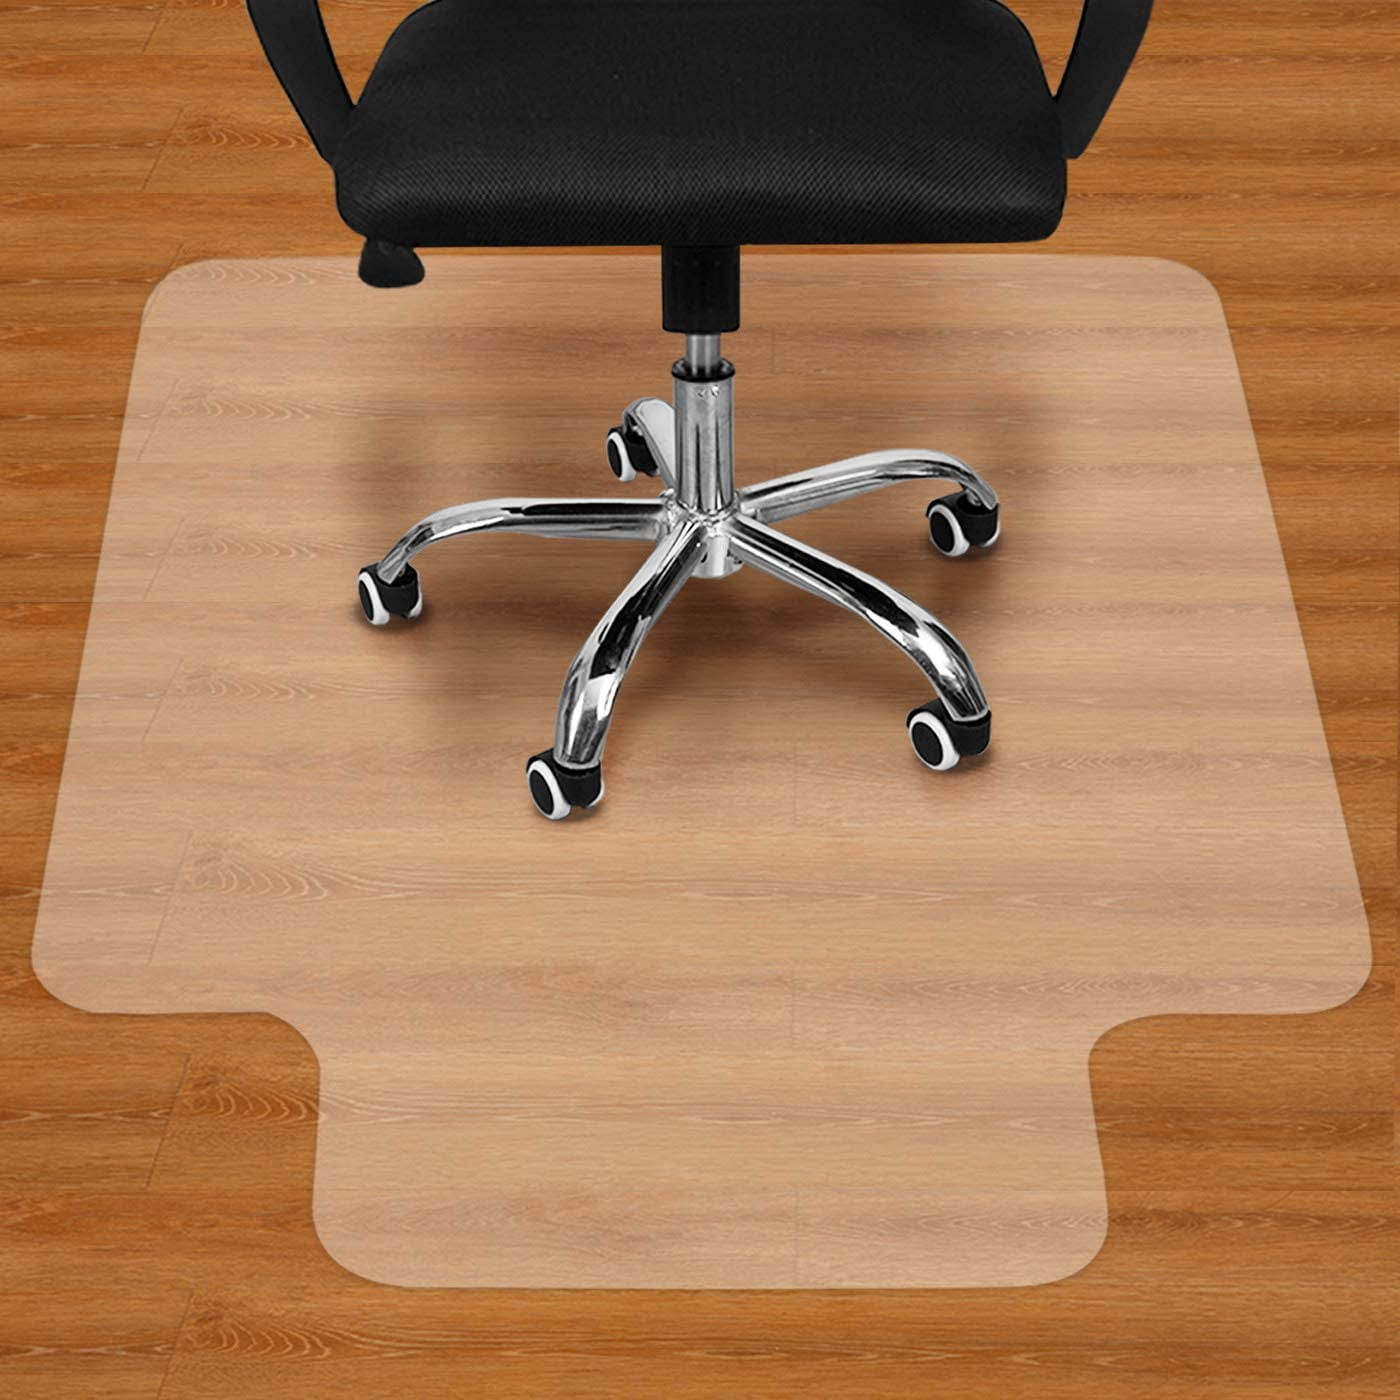 BUG HULL Chair Mat Hard Floor Protector 47 x 35 Multi-Purpose for Desks Office Chair Mat for Hardwood Floor Office and Home